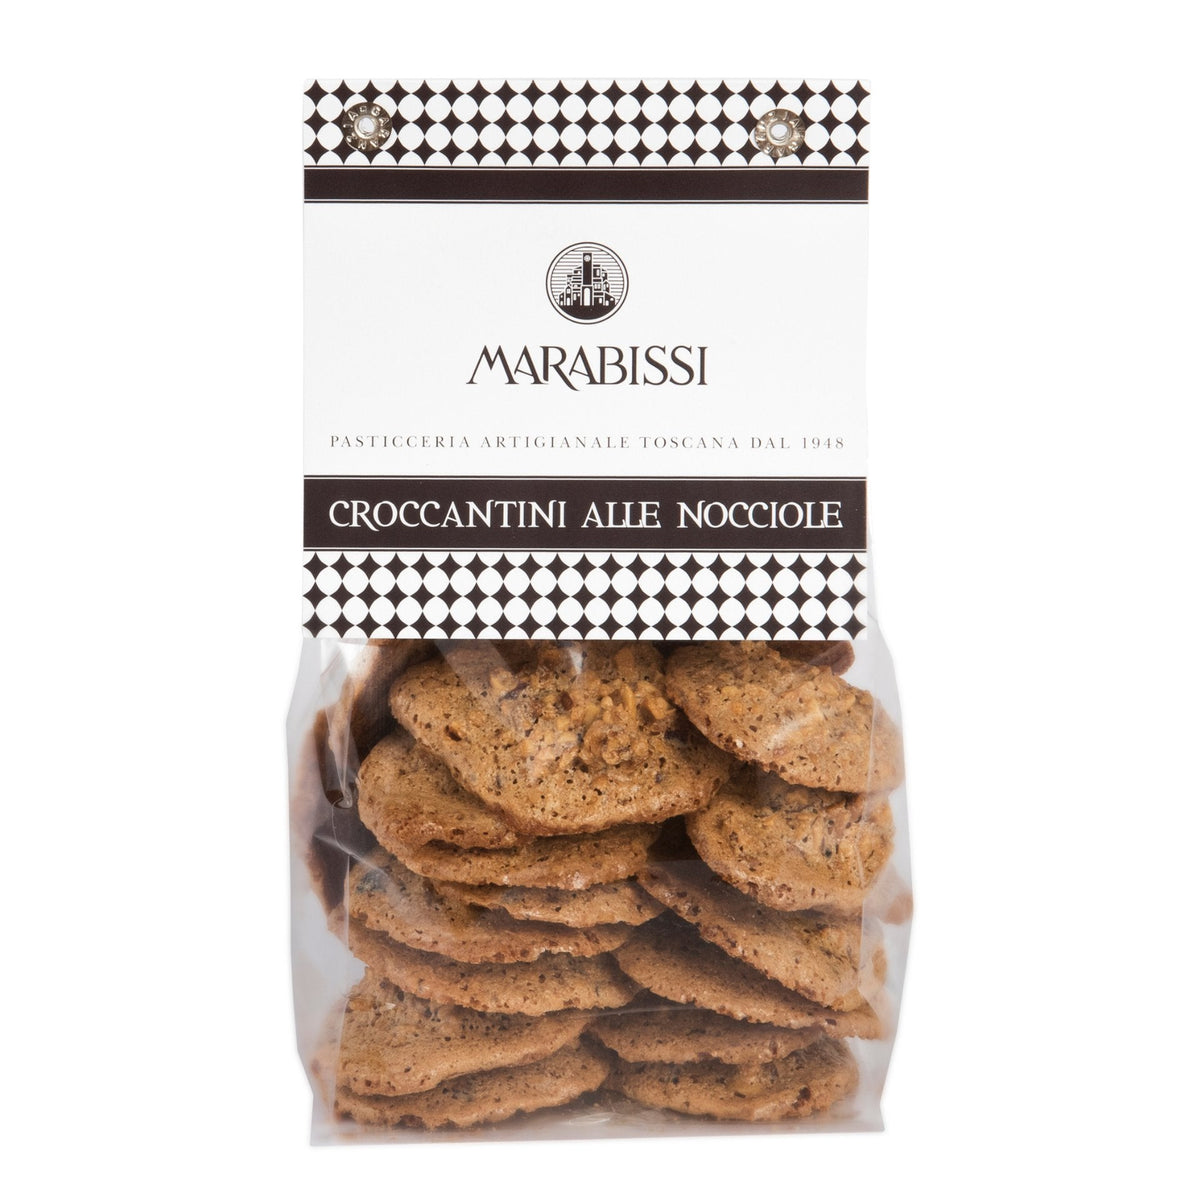 Marabissi Hazelnut Croccantini (Bag) 150g  | Imported and distributed in the UK by Just Gourmet Foods